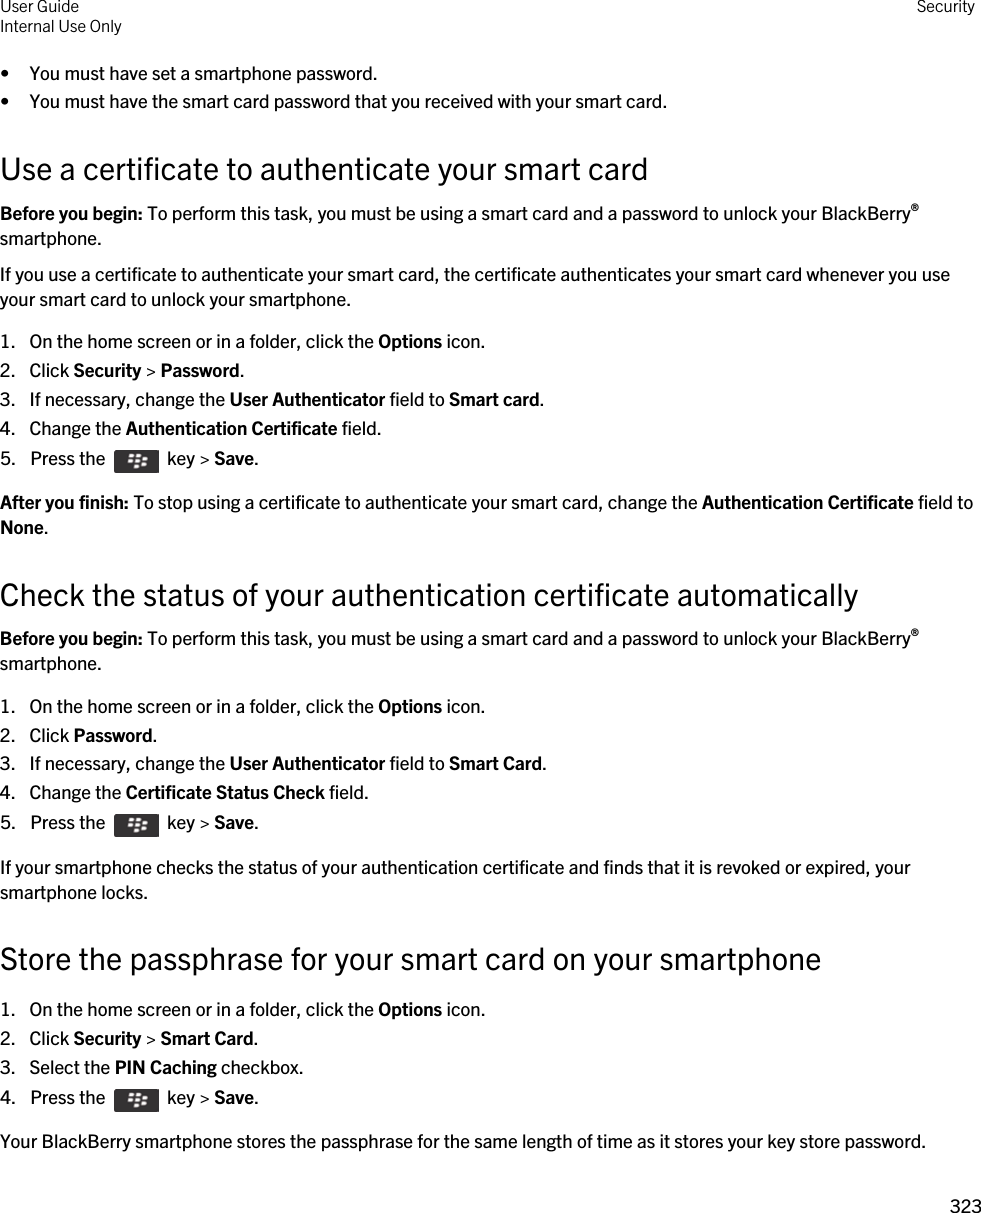 • You must have set a smartphone password.• You must have the smart card password that you received with your smart card.Use a certificate to authenticate your smart cardBefore you begin: To perform this task, you must be using a smart card and a password to unlock your BlackBerry® smartphone. If you use a certificate to authenticate your smart card, the certificate authenticates your smart card whenever you use your smart card to unlock your smartphone.1. On the home screen or in a folder, click the Options icon.2. Click Security &gt; Password.3. If necessary, change the User Authenticator field to Smart card.4. Change the Authentication Certificate field.5.  Press the    key &gt; Save. After you finish: To stop using a certificate to authenticate your smart card, change the Authentication Certificate field to None.Check the status of your authentication certificate automaticallyBefore you begin: To perform this task, you must be using a smart card and a password to unlock your BlackBerry® smartphone. 1. On the home screen or in a folder, click the Options icon.2. Click Password.3. If necessary, change the User Authenticator field to Smart Card.4. Change the Certificate Status Check field.5.  Press the    key &gt; Save. If your smartphone checks the status of your authentication certificate and finds that it is revoked or expired, your smartphone locks.Store the passphrase for your smart card on your smartphone1. On the home screen or in a folder, click the Options icon.2. Click Security &gt; Smart Card.3. Select the PIN Caching checkbox.4.  Press the    key &gt; Save. Your BlackBerry smartphone stores the passphrase for the same length of time as it stores your key store password.User GuideInternal Use Only Security323 